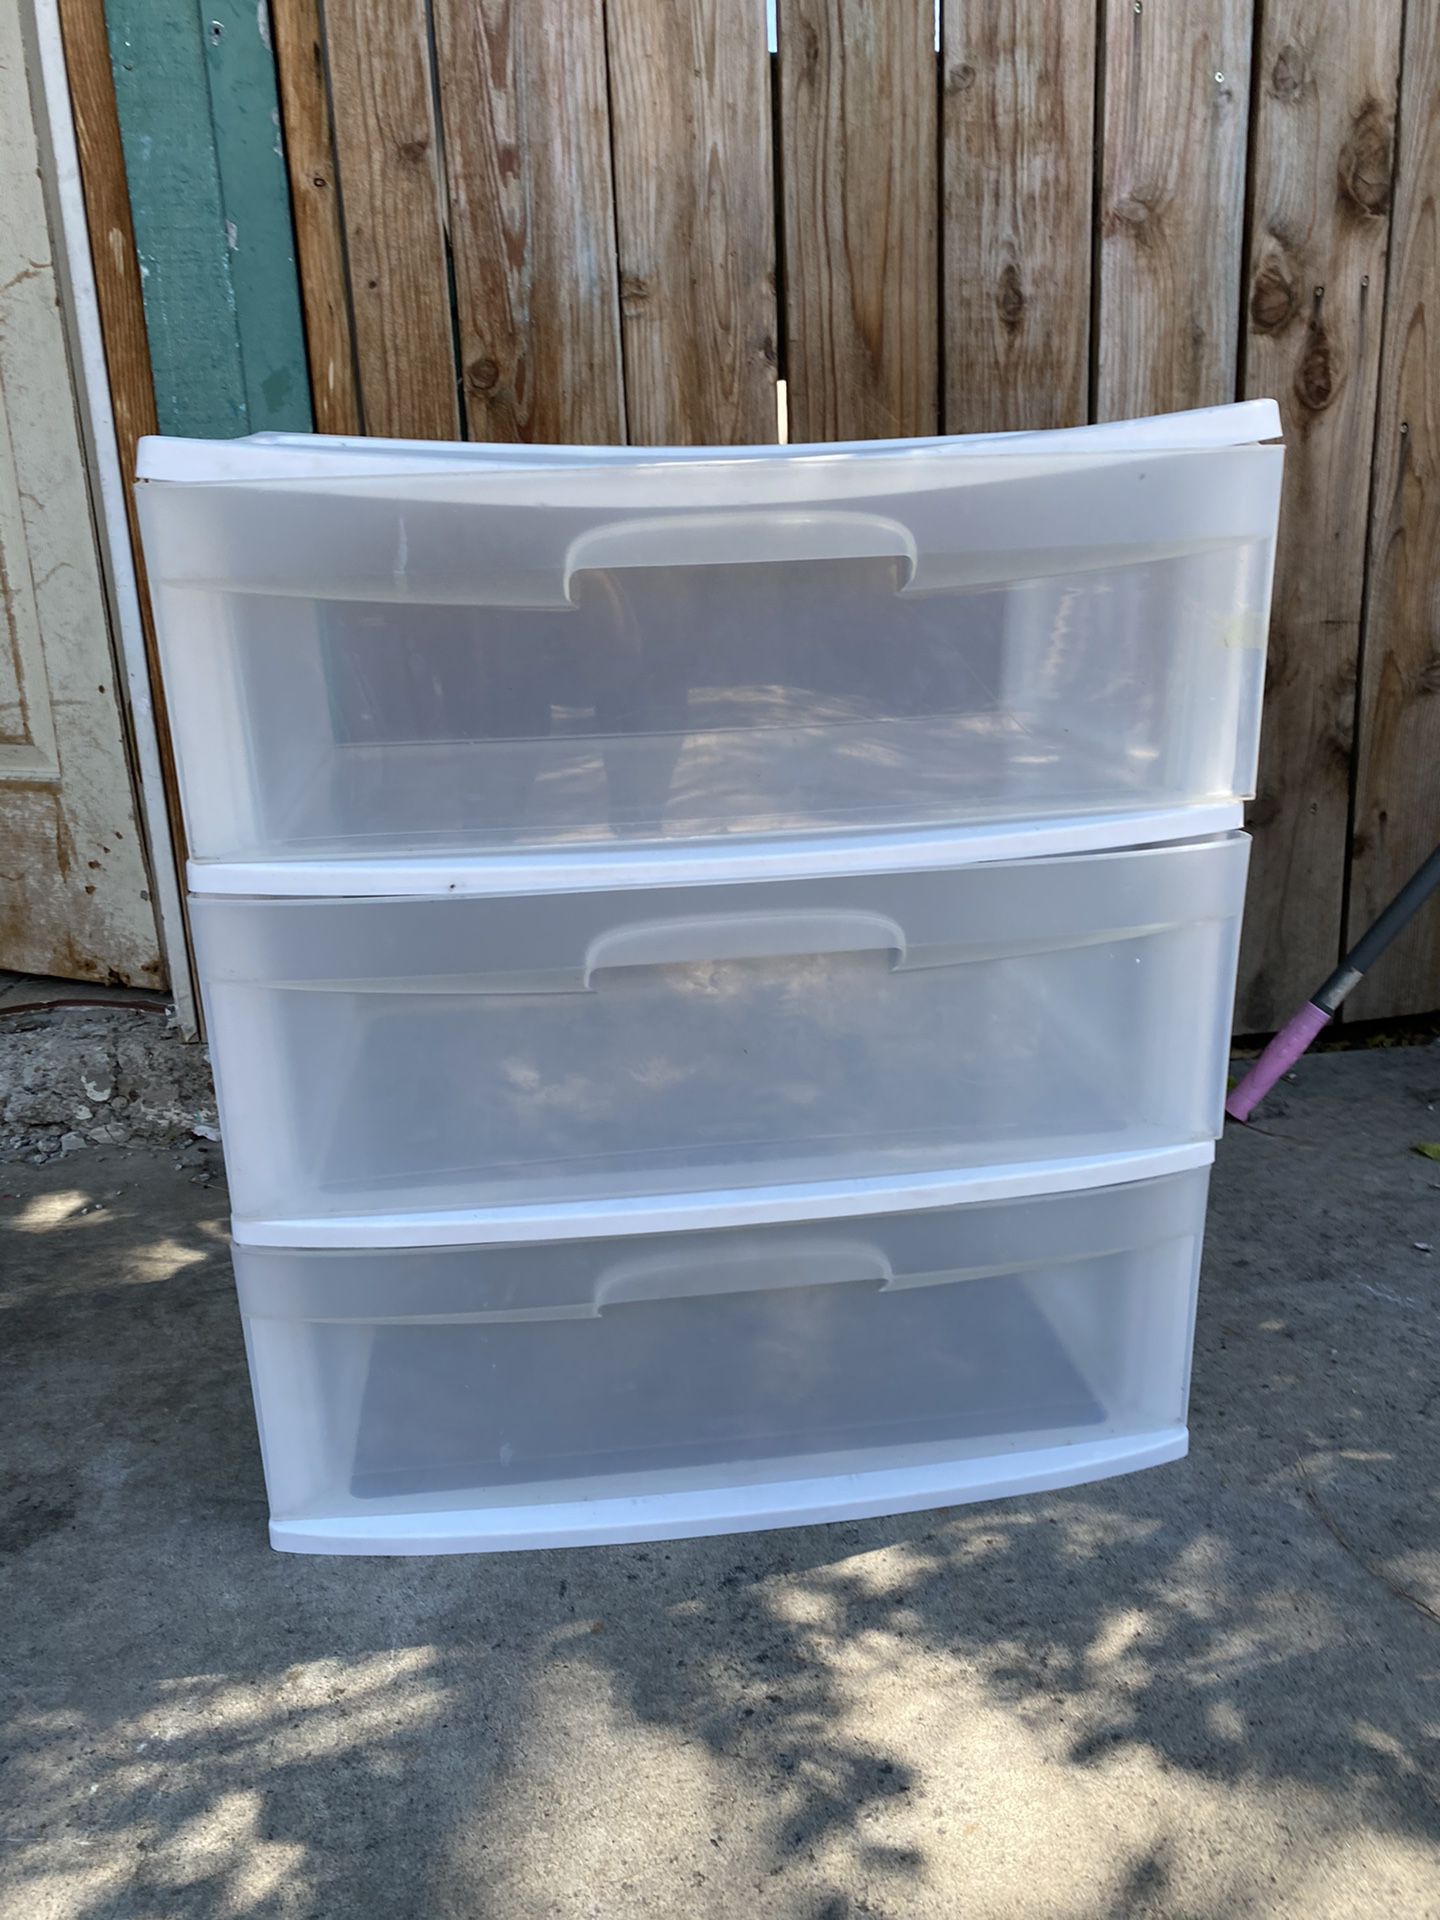 Sterlite storage containers/drawers